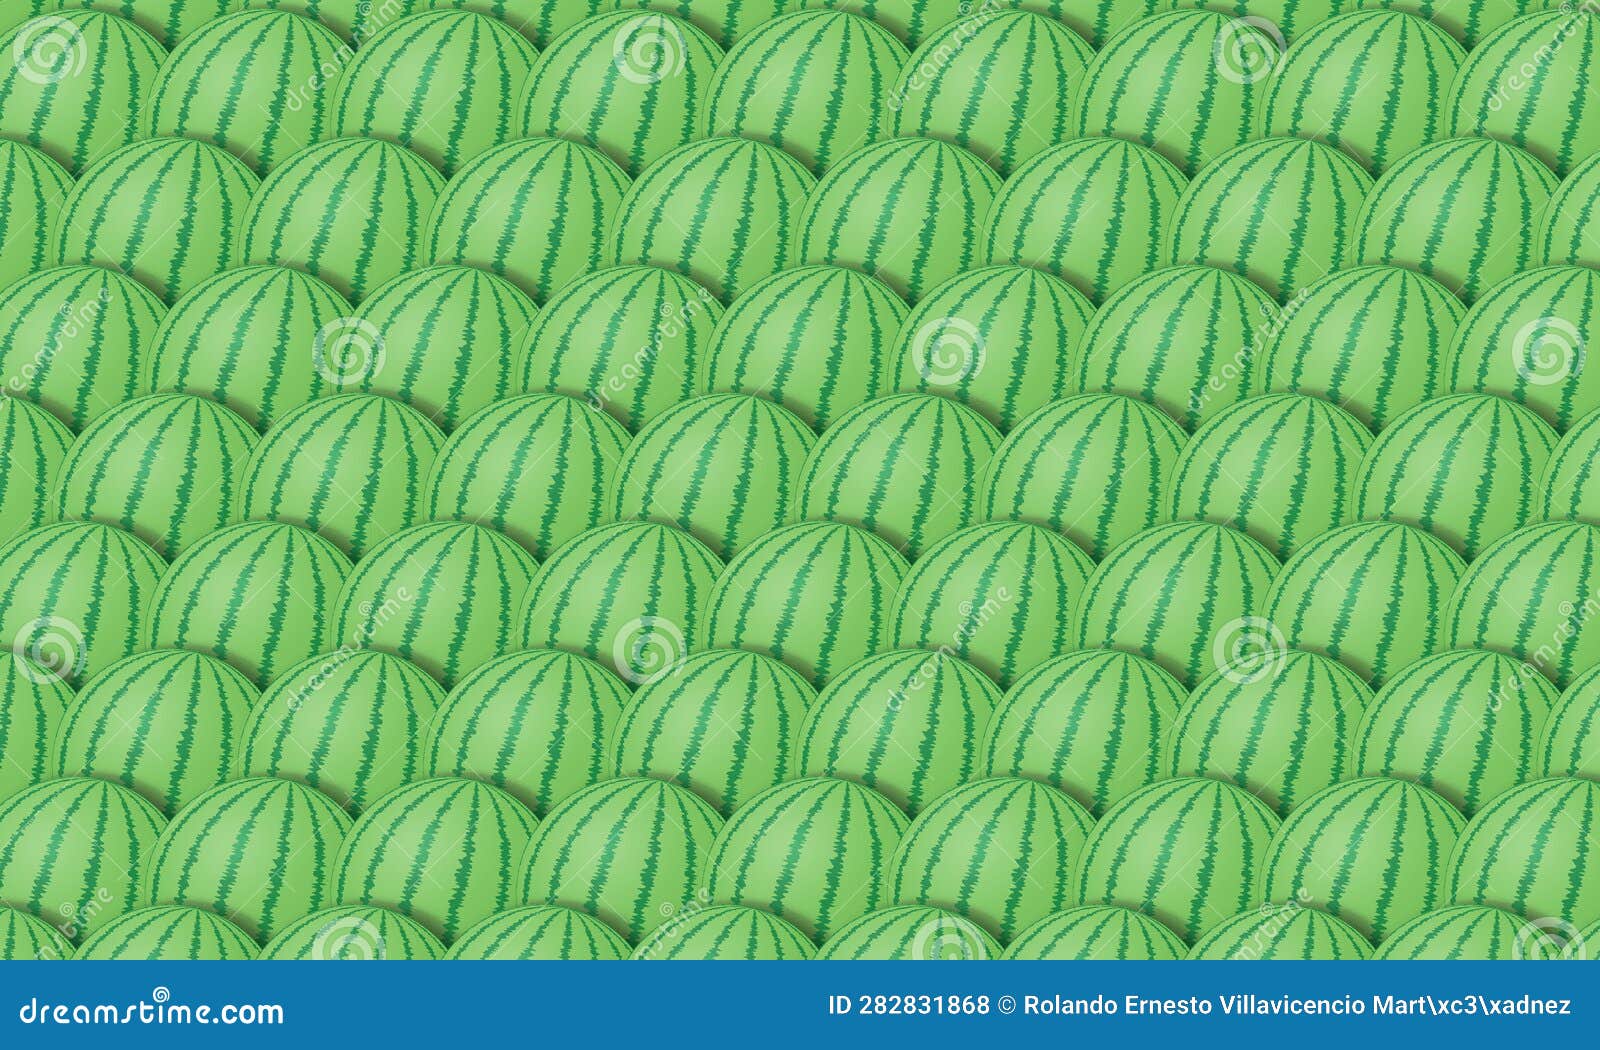 pattern  of whole watermelons. green fruits background.